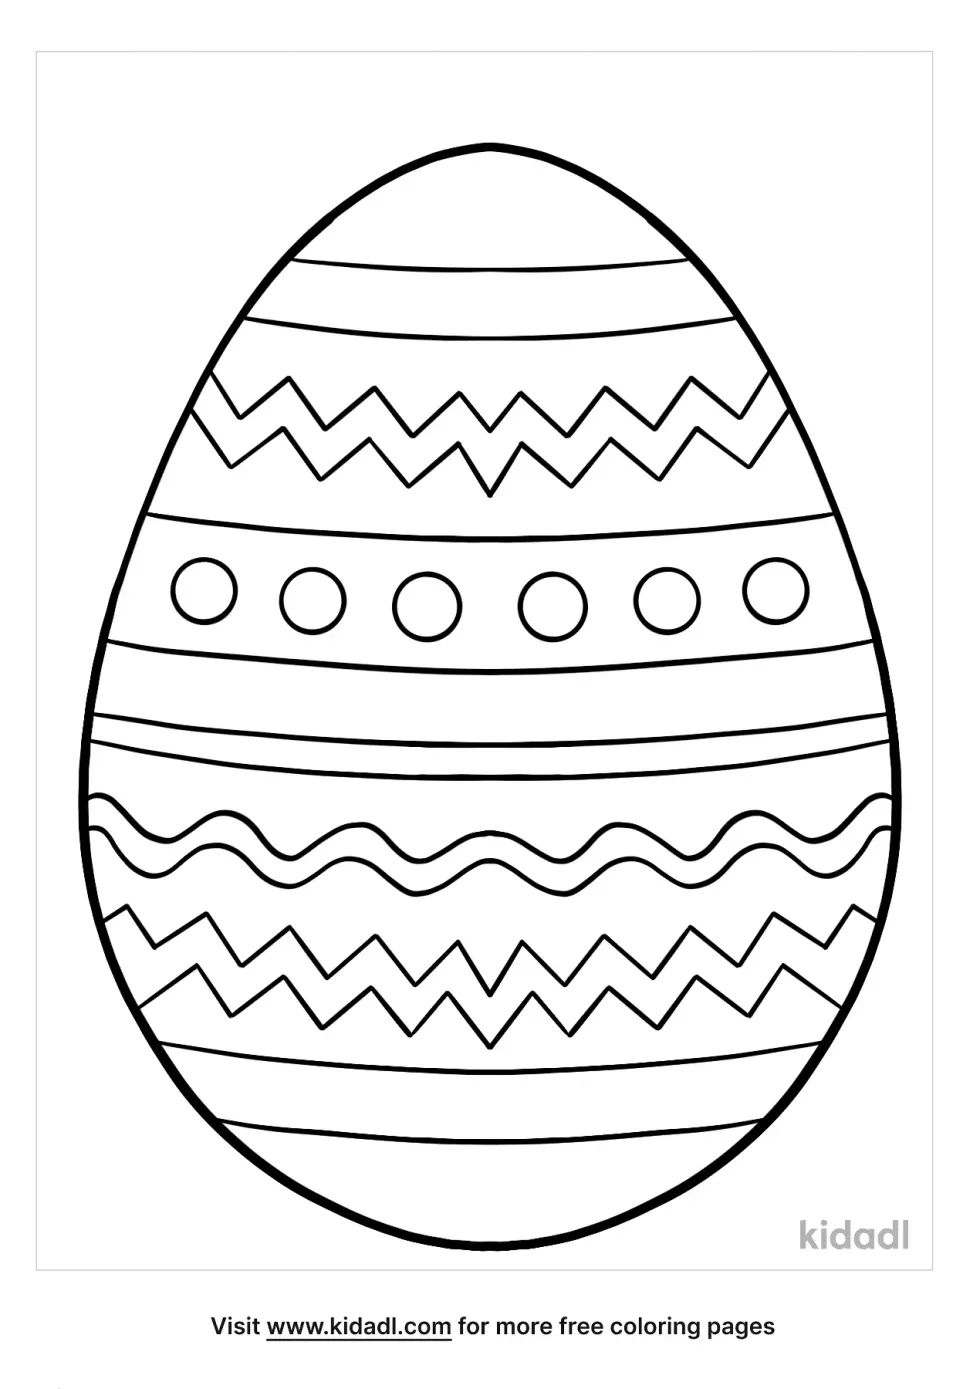 Picture Of A Easter Egg